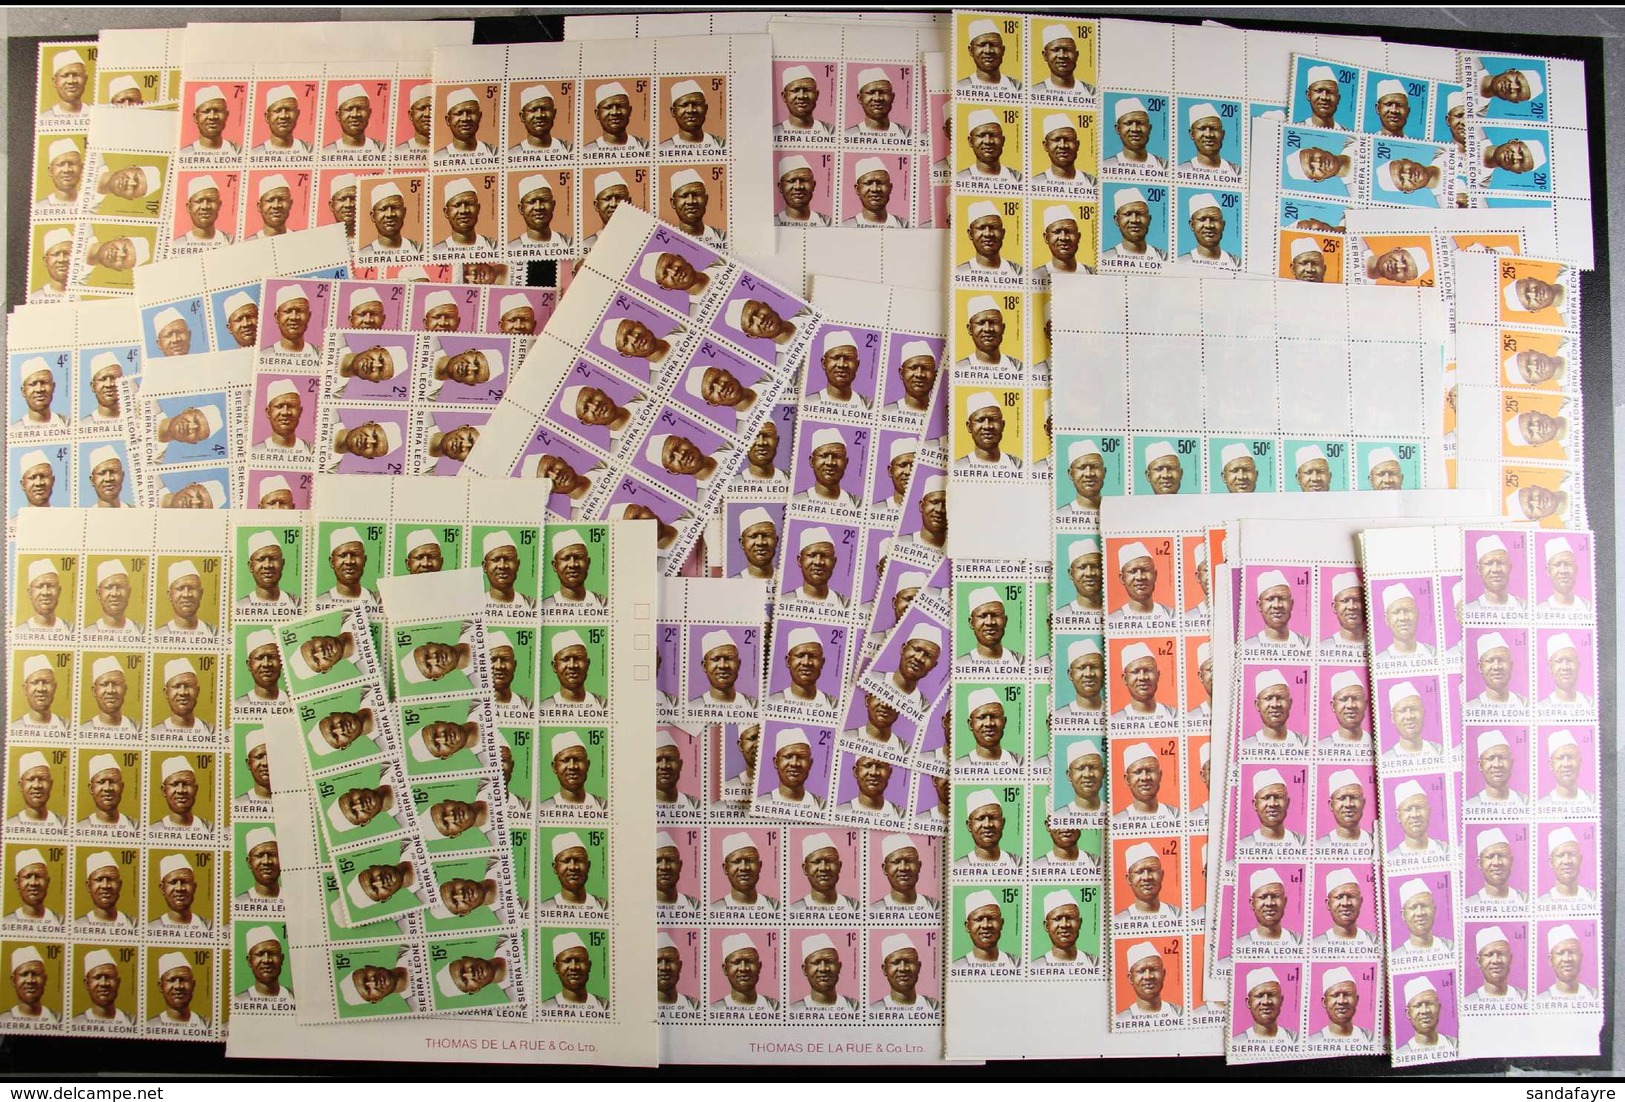 1972 President Stevens In Large Multiples (up To A Half Sheet Of 50) Of All Values To 2L, Some Values With Stamps Clearl - Sierra Leone (...-1960)